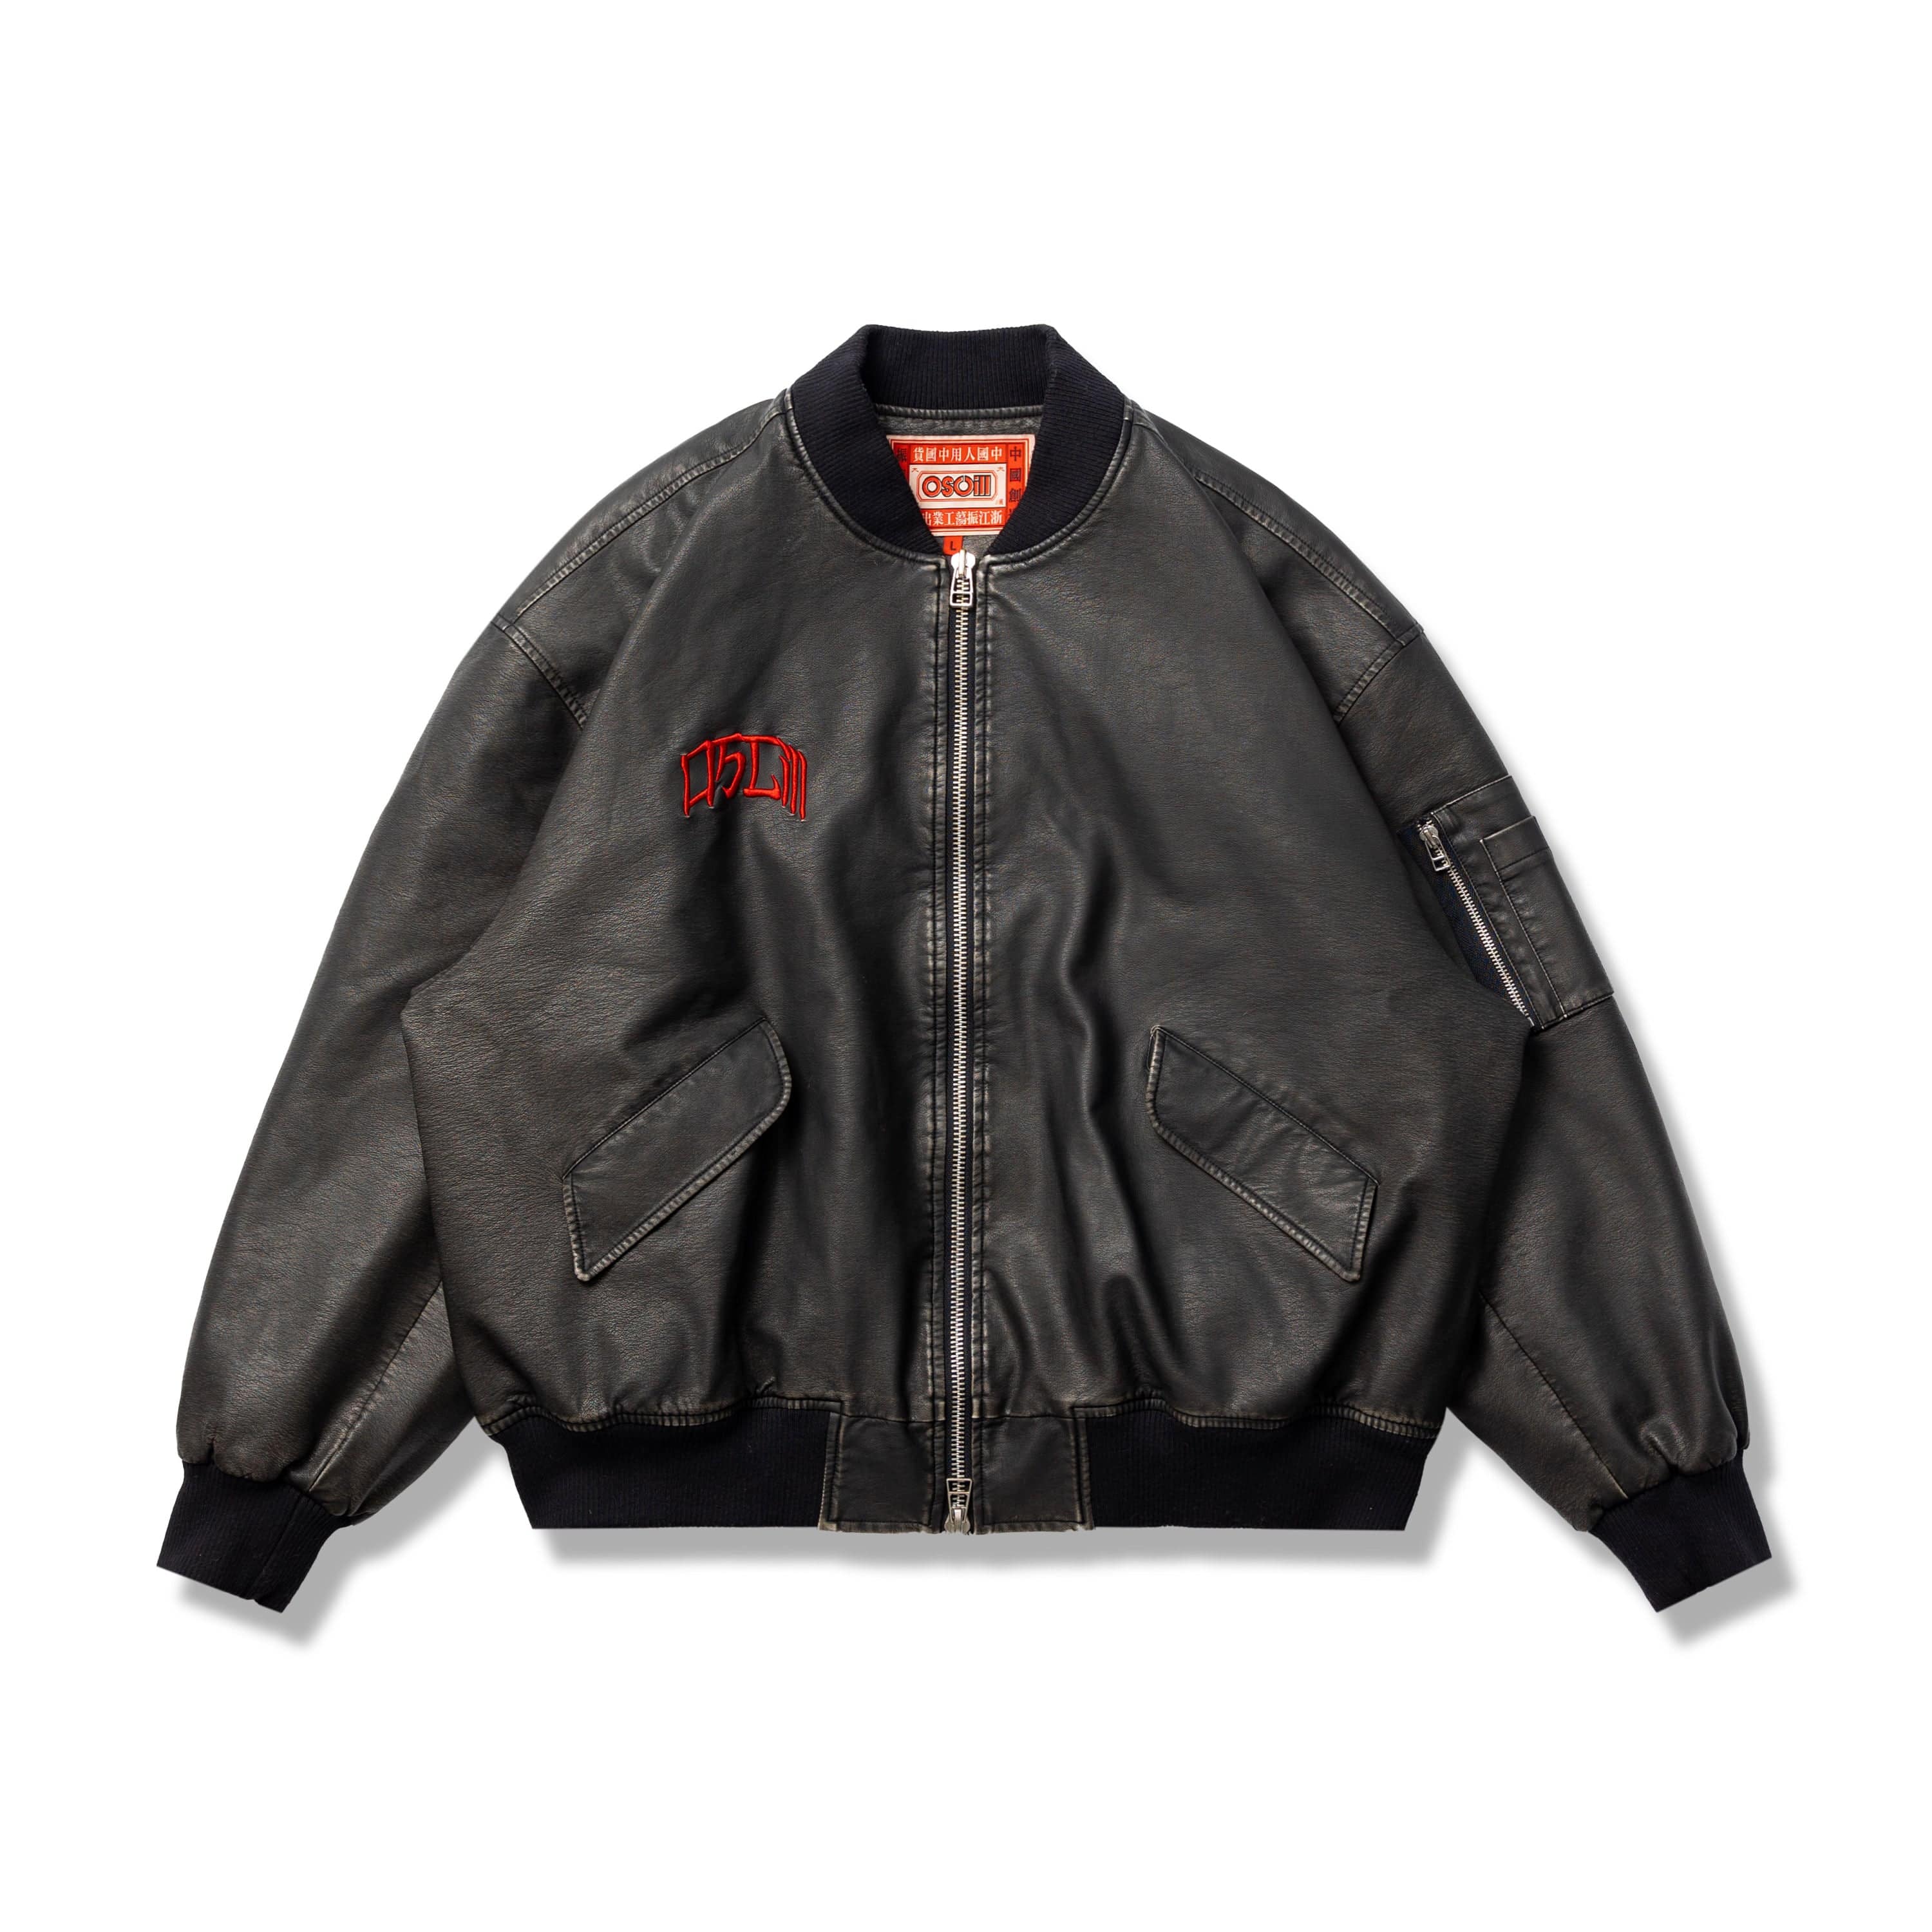 OSCILL Washed MA1 Bomber Faux Leather Jacket, premium urban and streetwear designers apparel on PROJECTISR.com, OSCILL